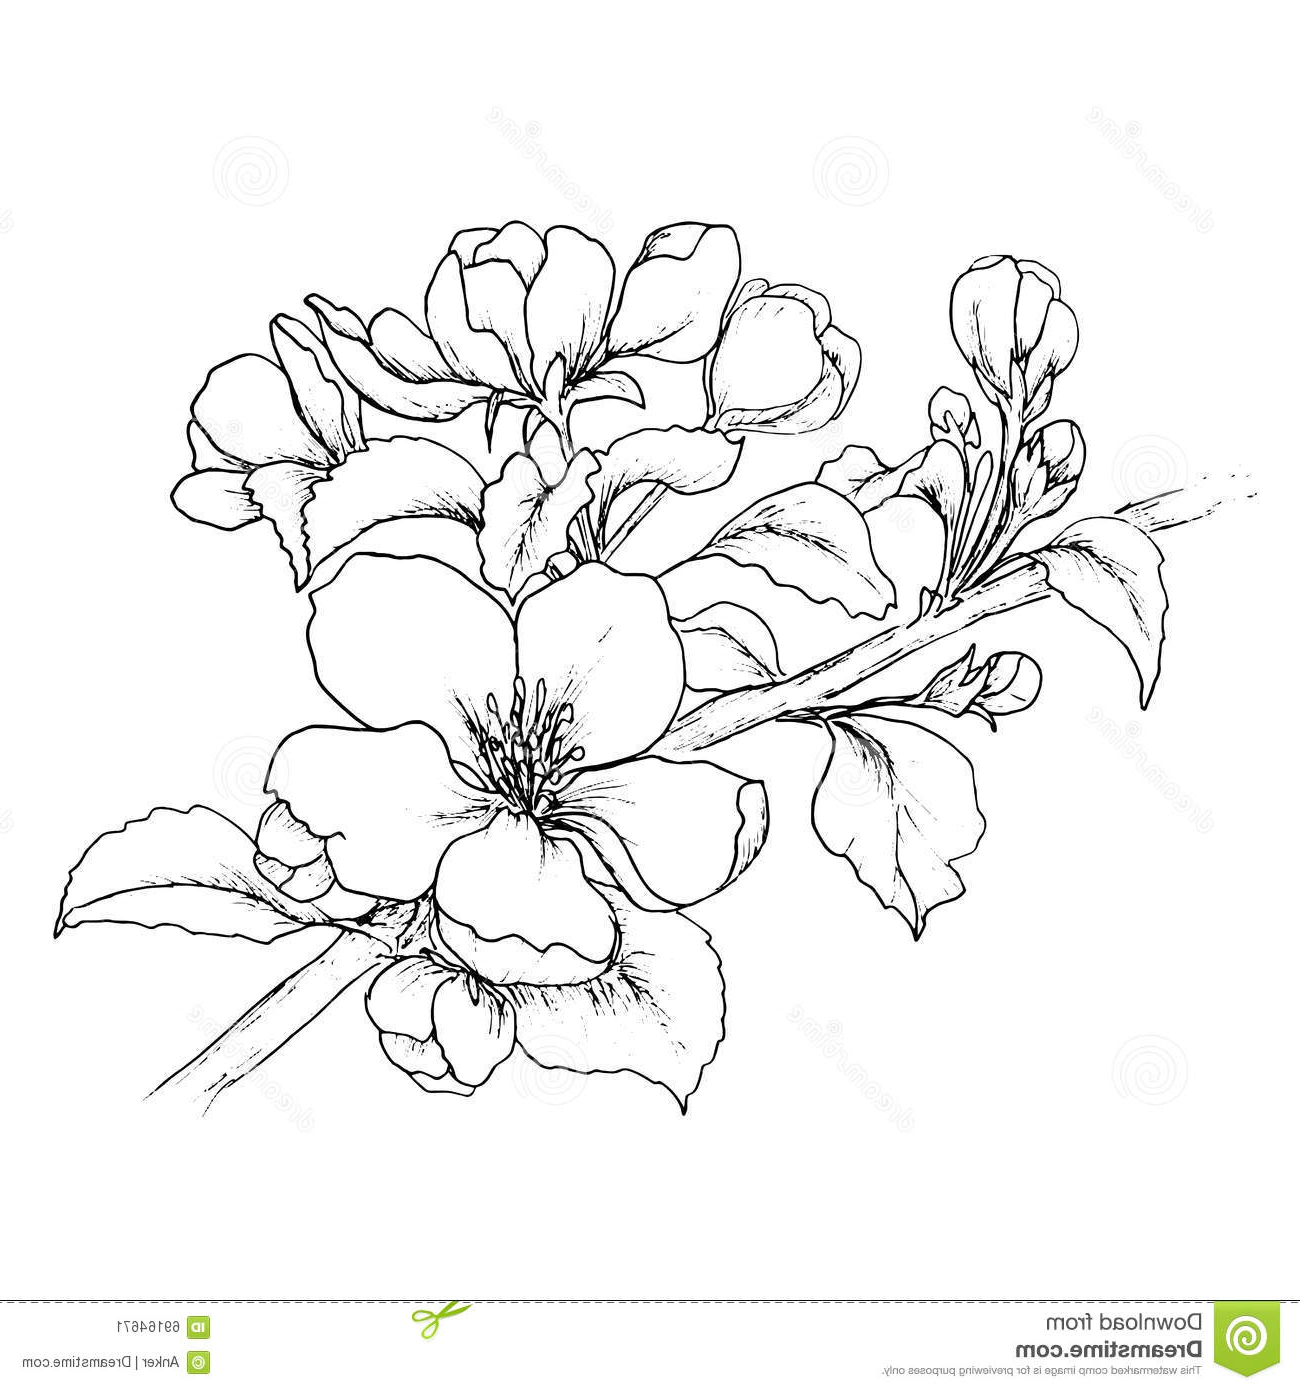 The best free Cherry blossom drawing images. Download from 2538 free